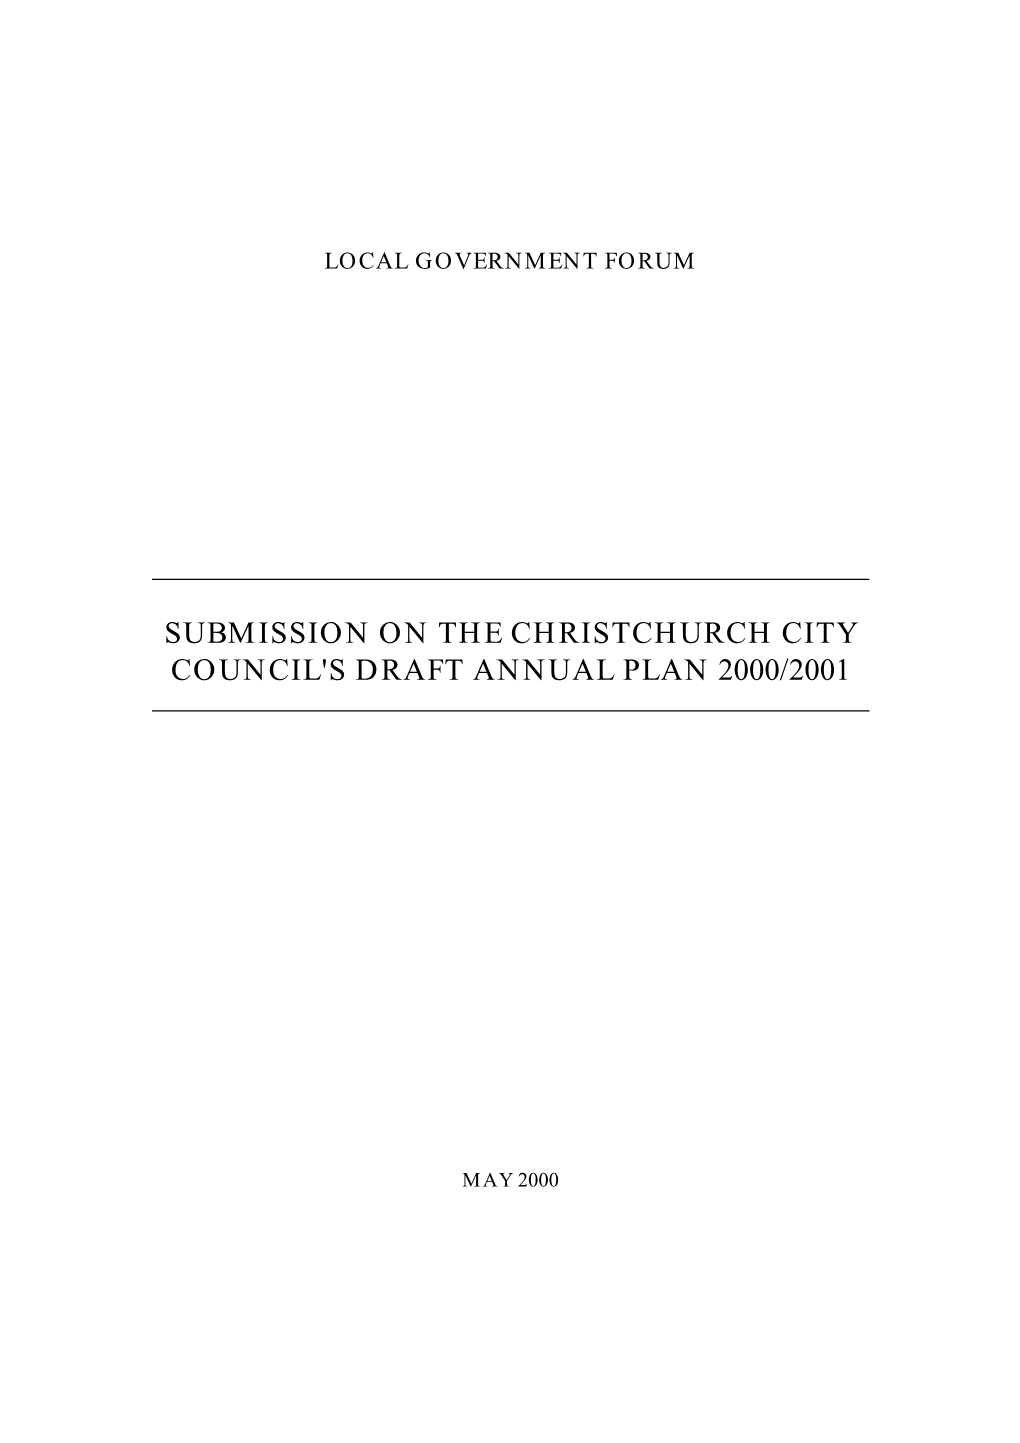 Submission on the Christchurch City Council's Draft Annual Plan 2000/2001